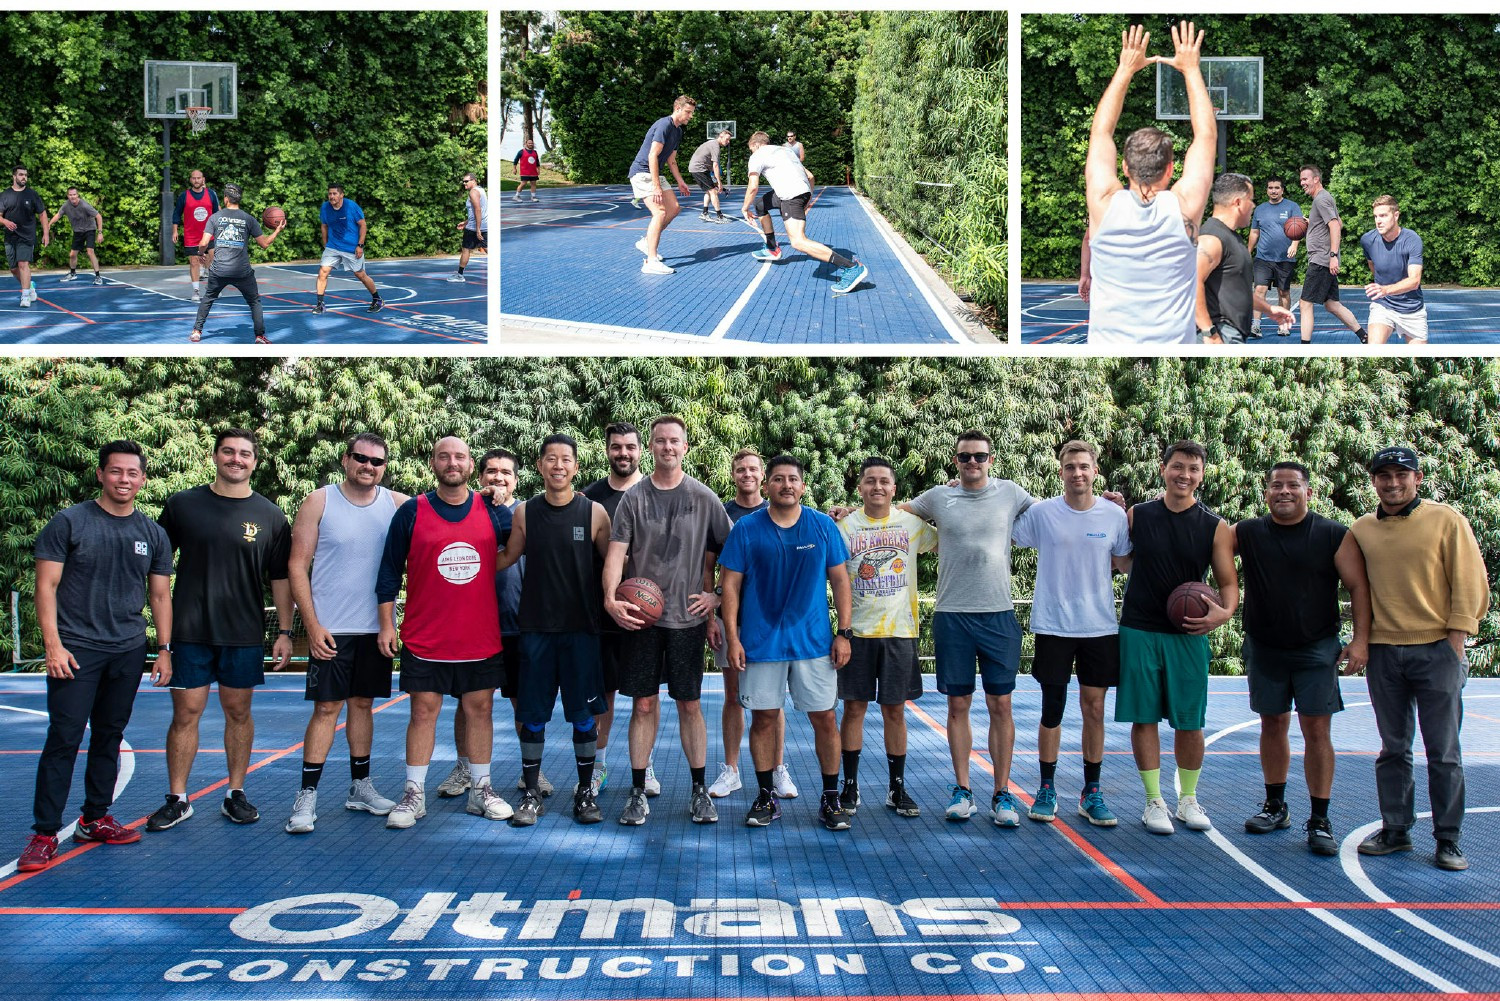 Promoting wellness & team building via a full-service gym, basketball, and pickleball courts.